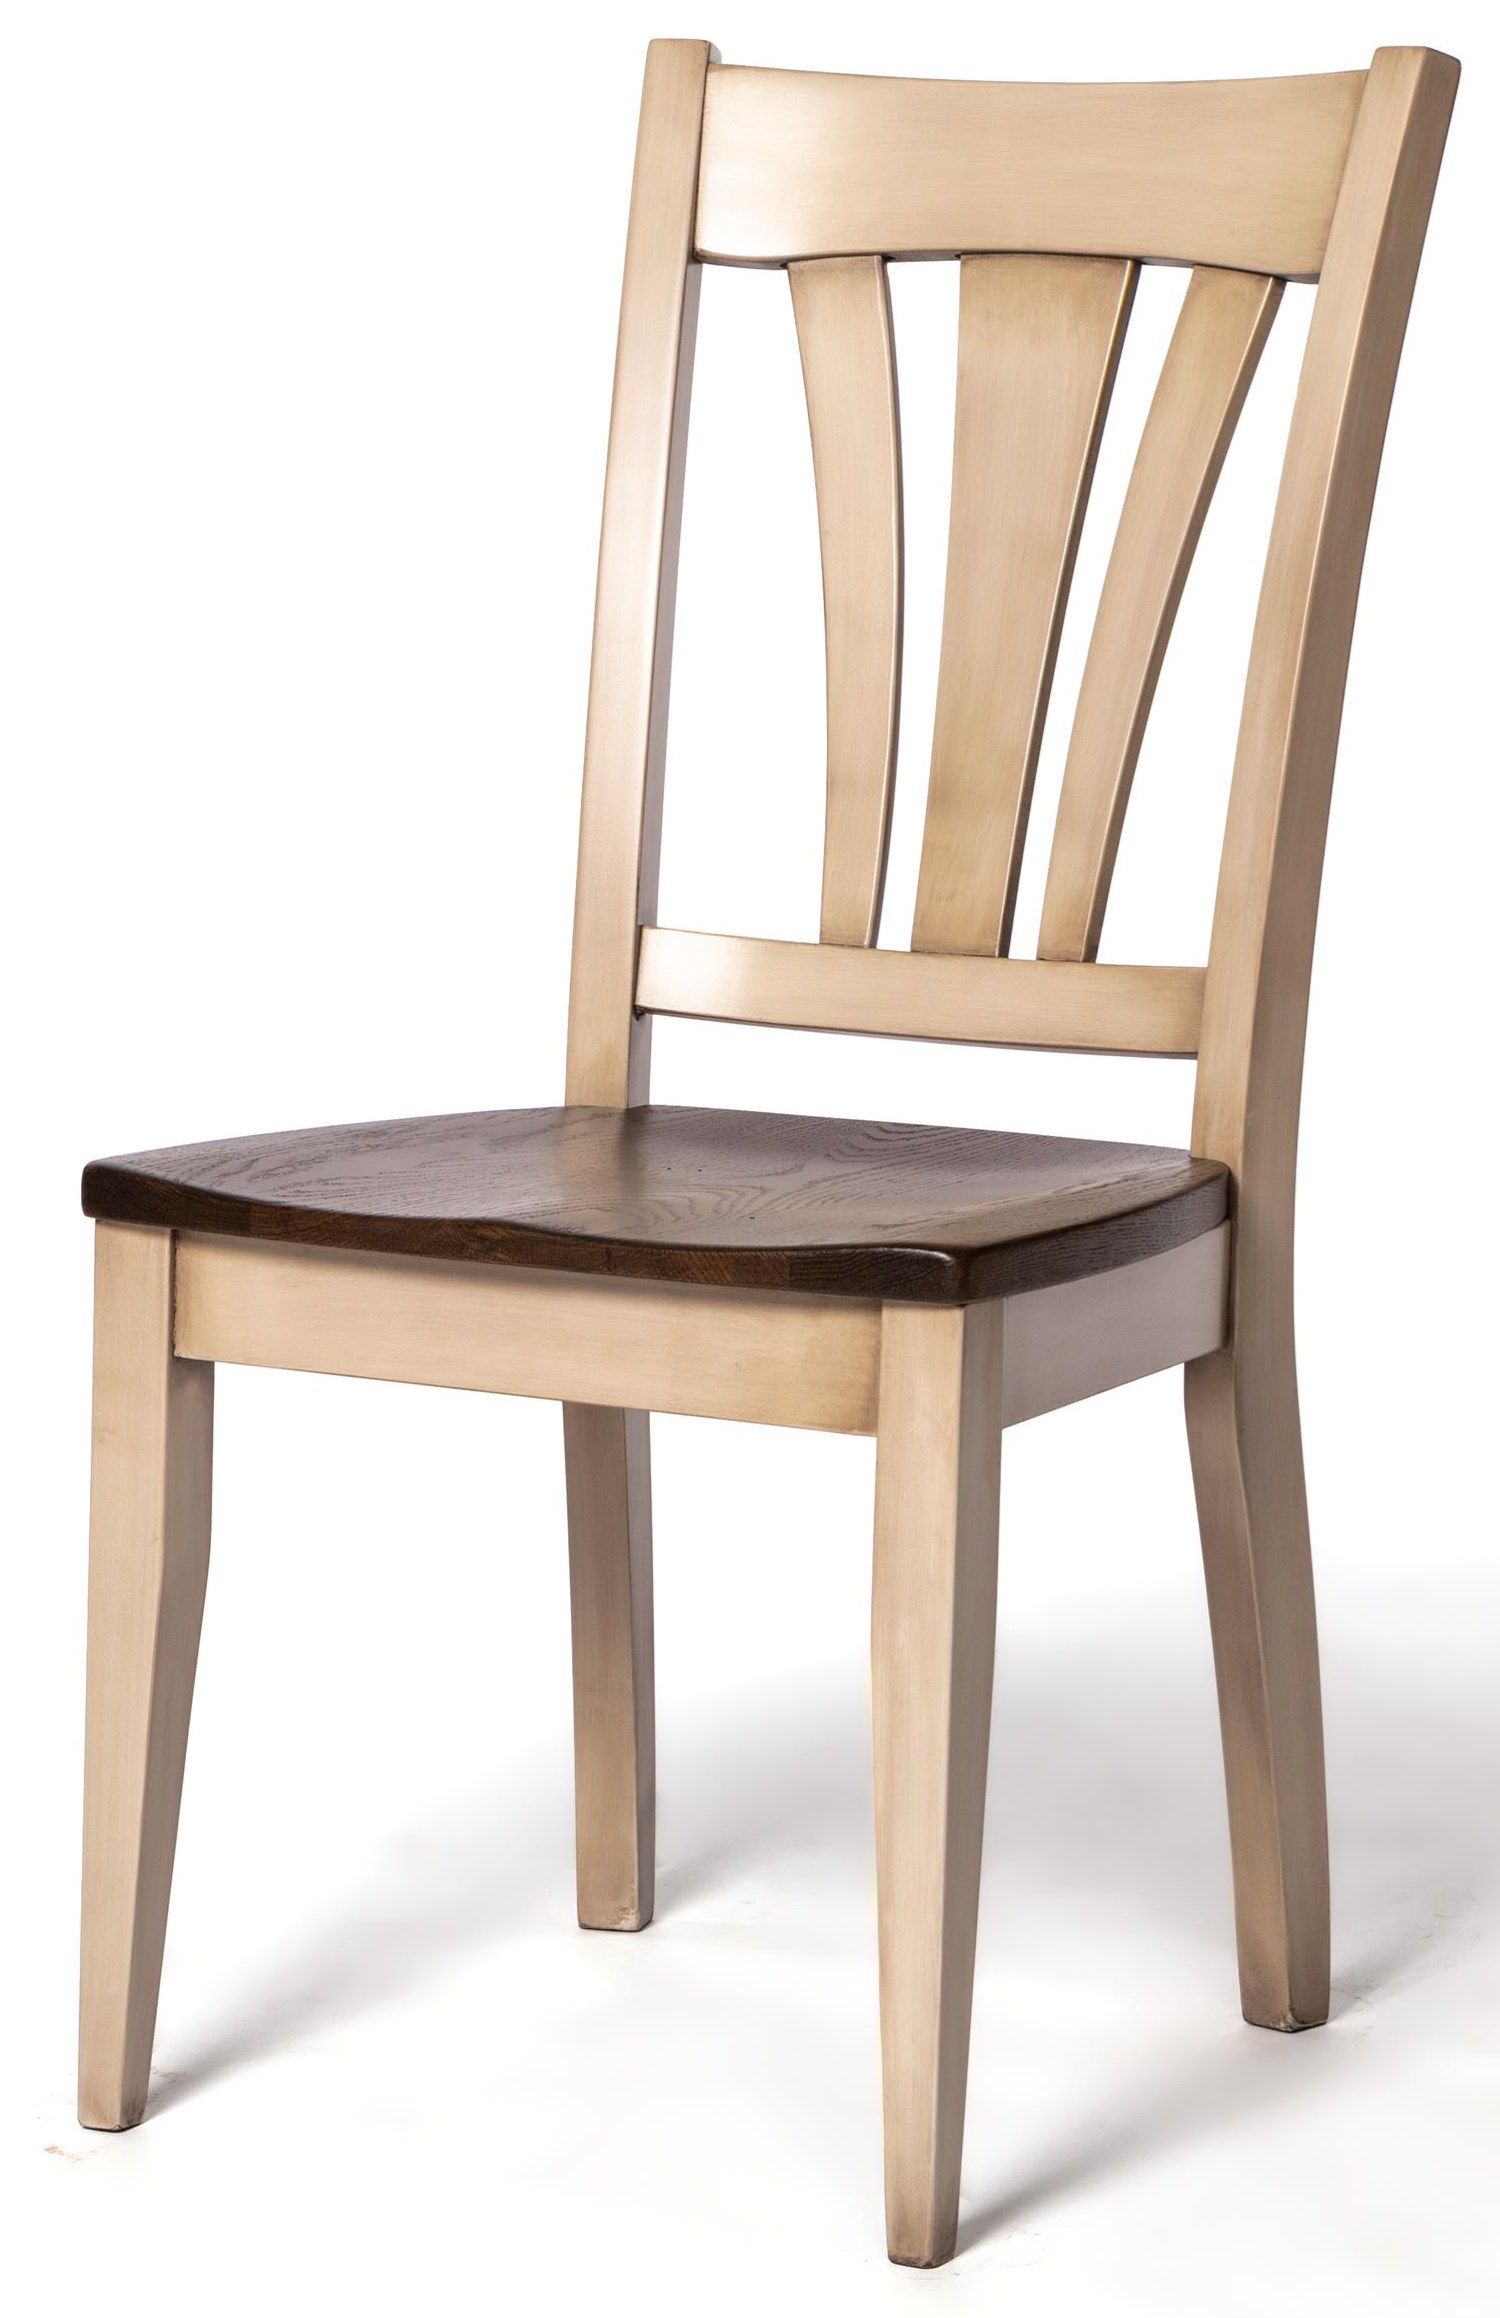 Alivia Dining Side Chair Regarding Aalivia Slipper Chairs (View 10 of 15)